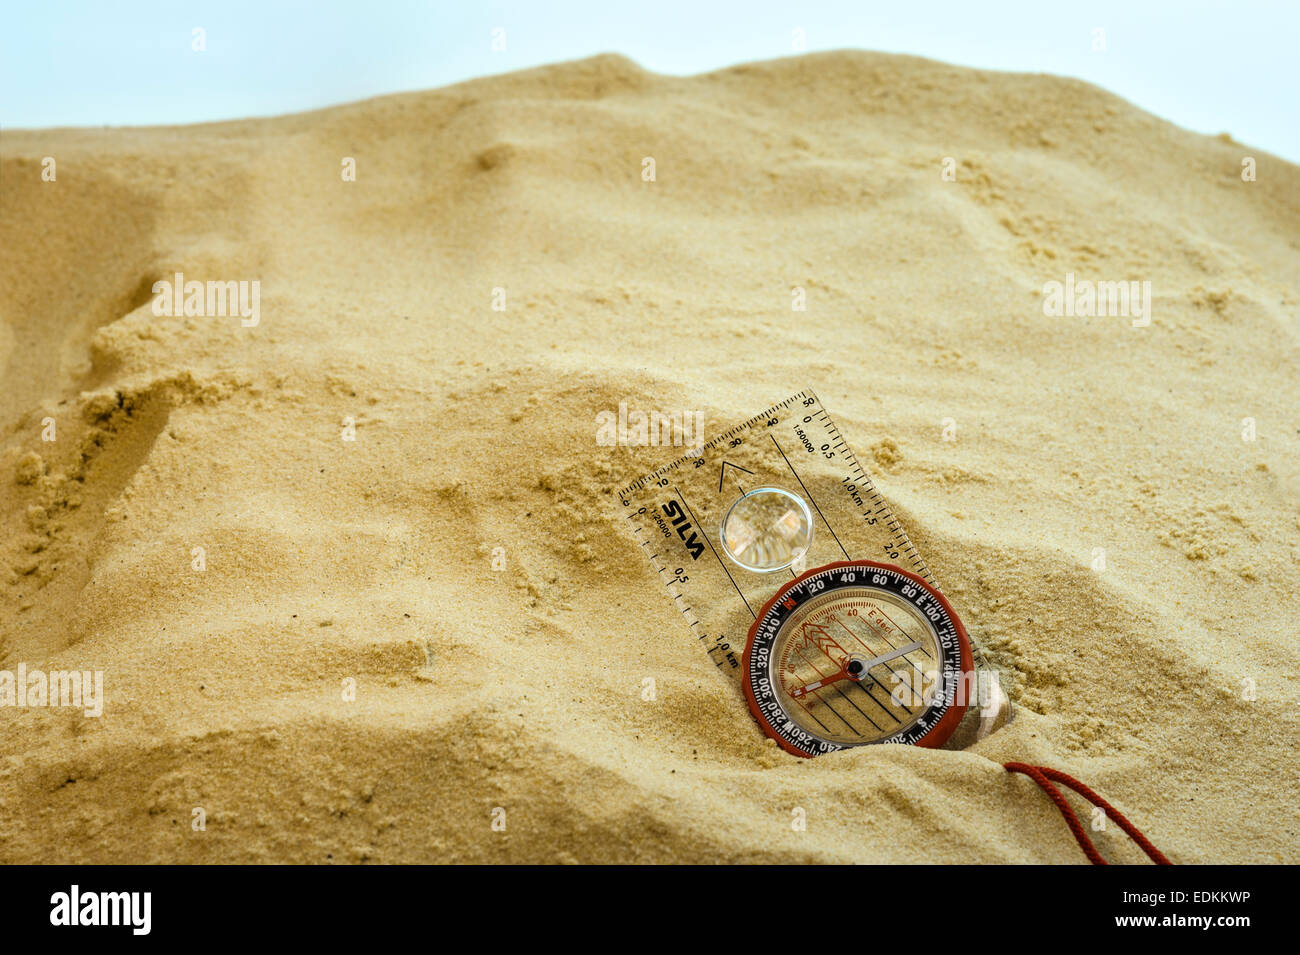 Compass buried in sand. Stock Photo